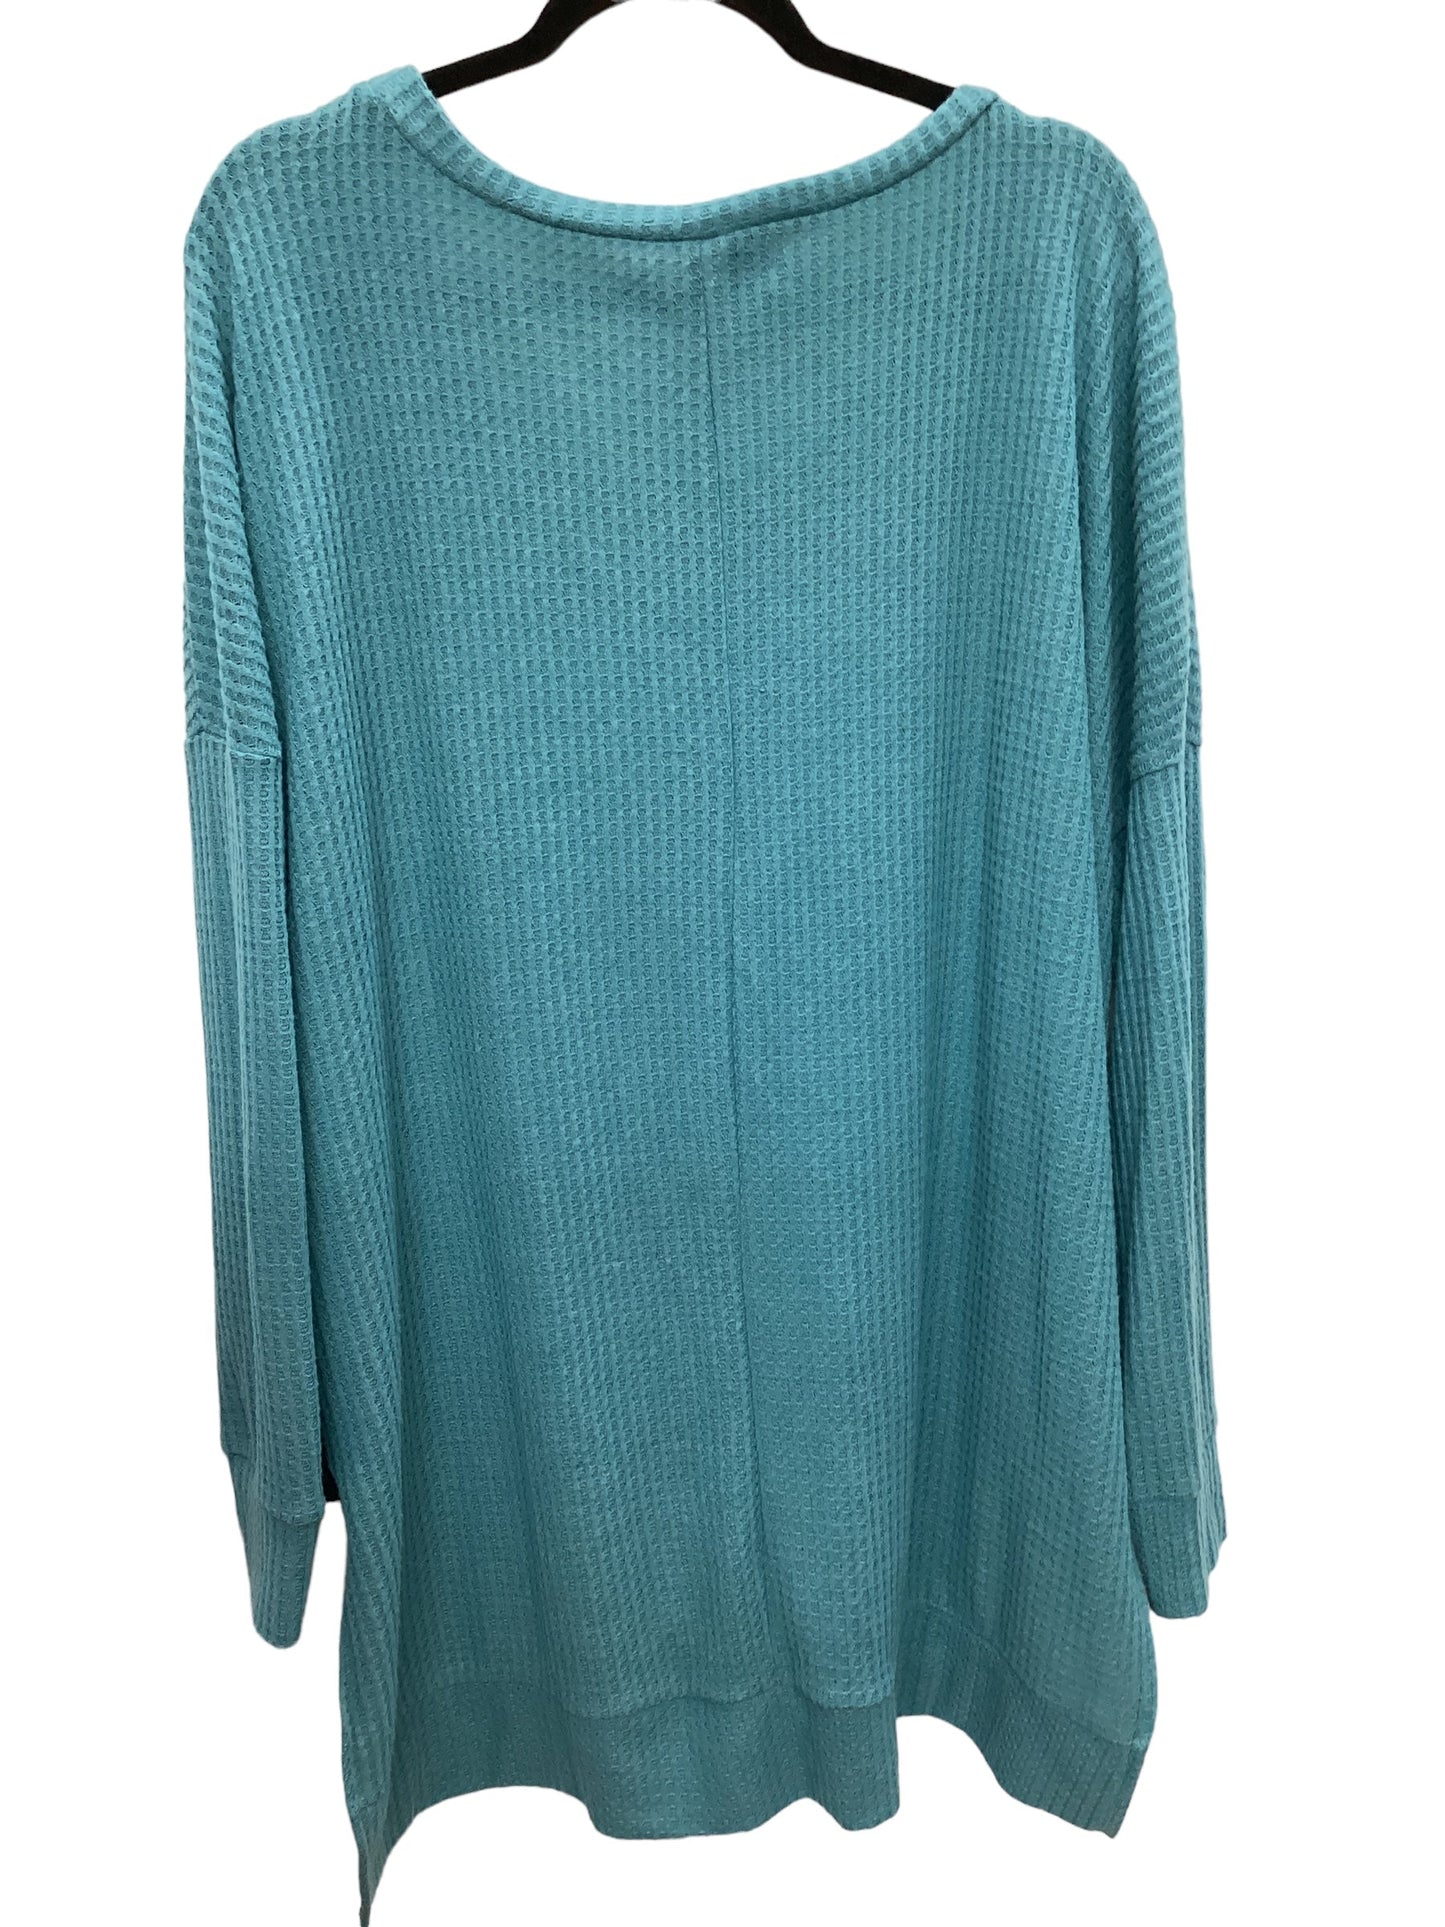 Top Long Sleeve By Zenana Outfitters  Size: 2x